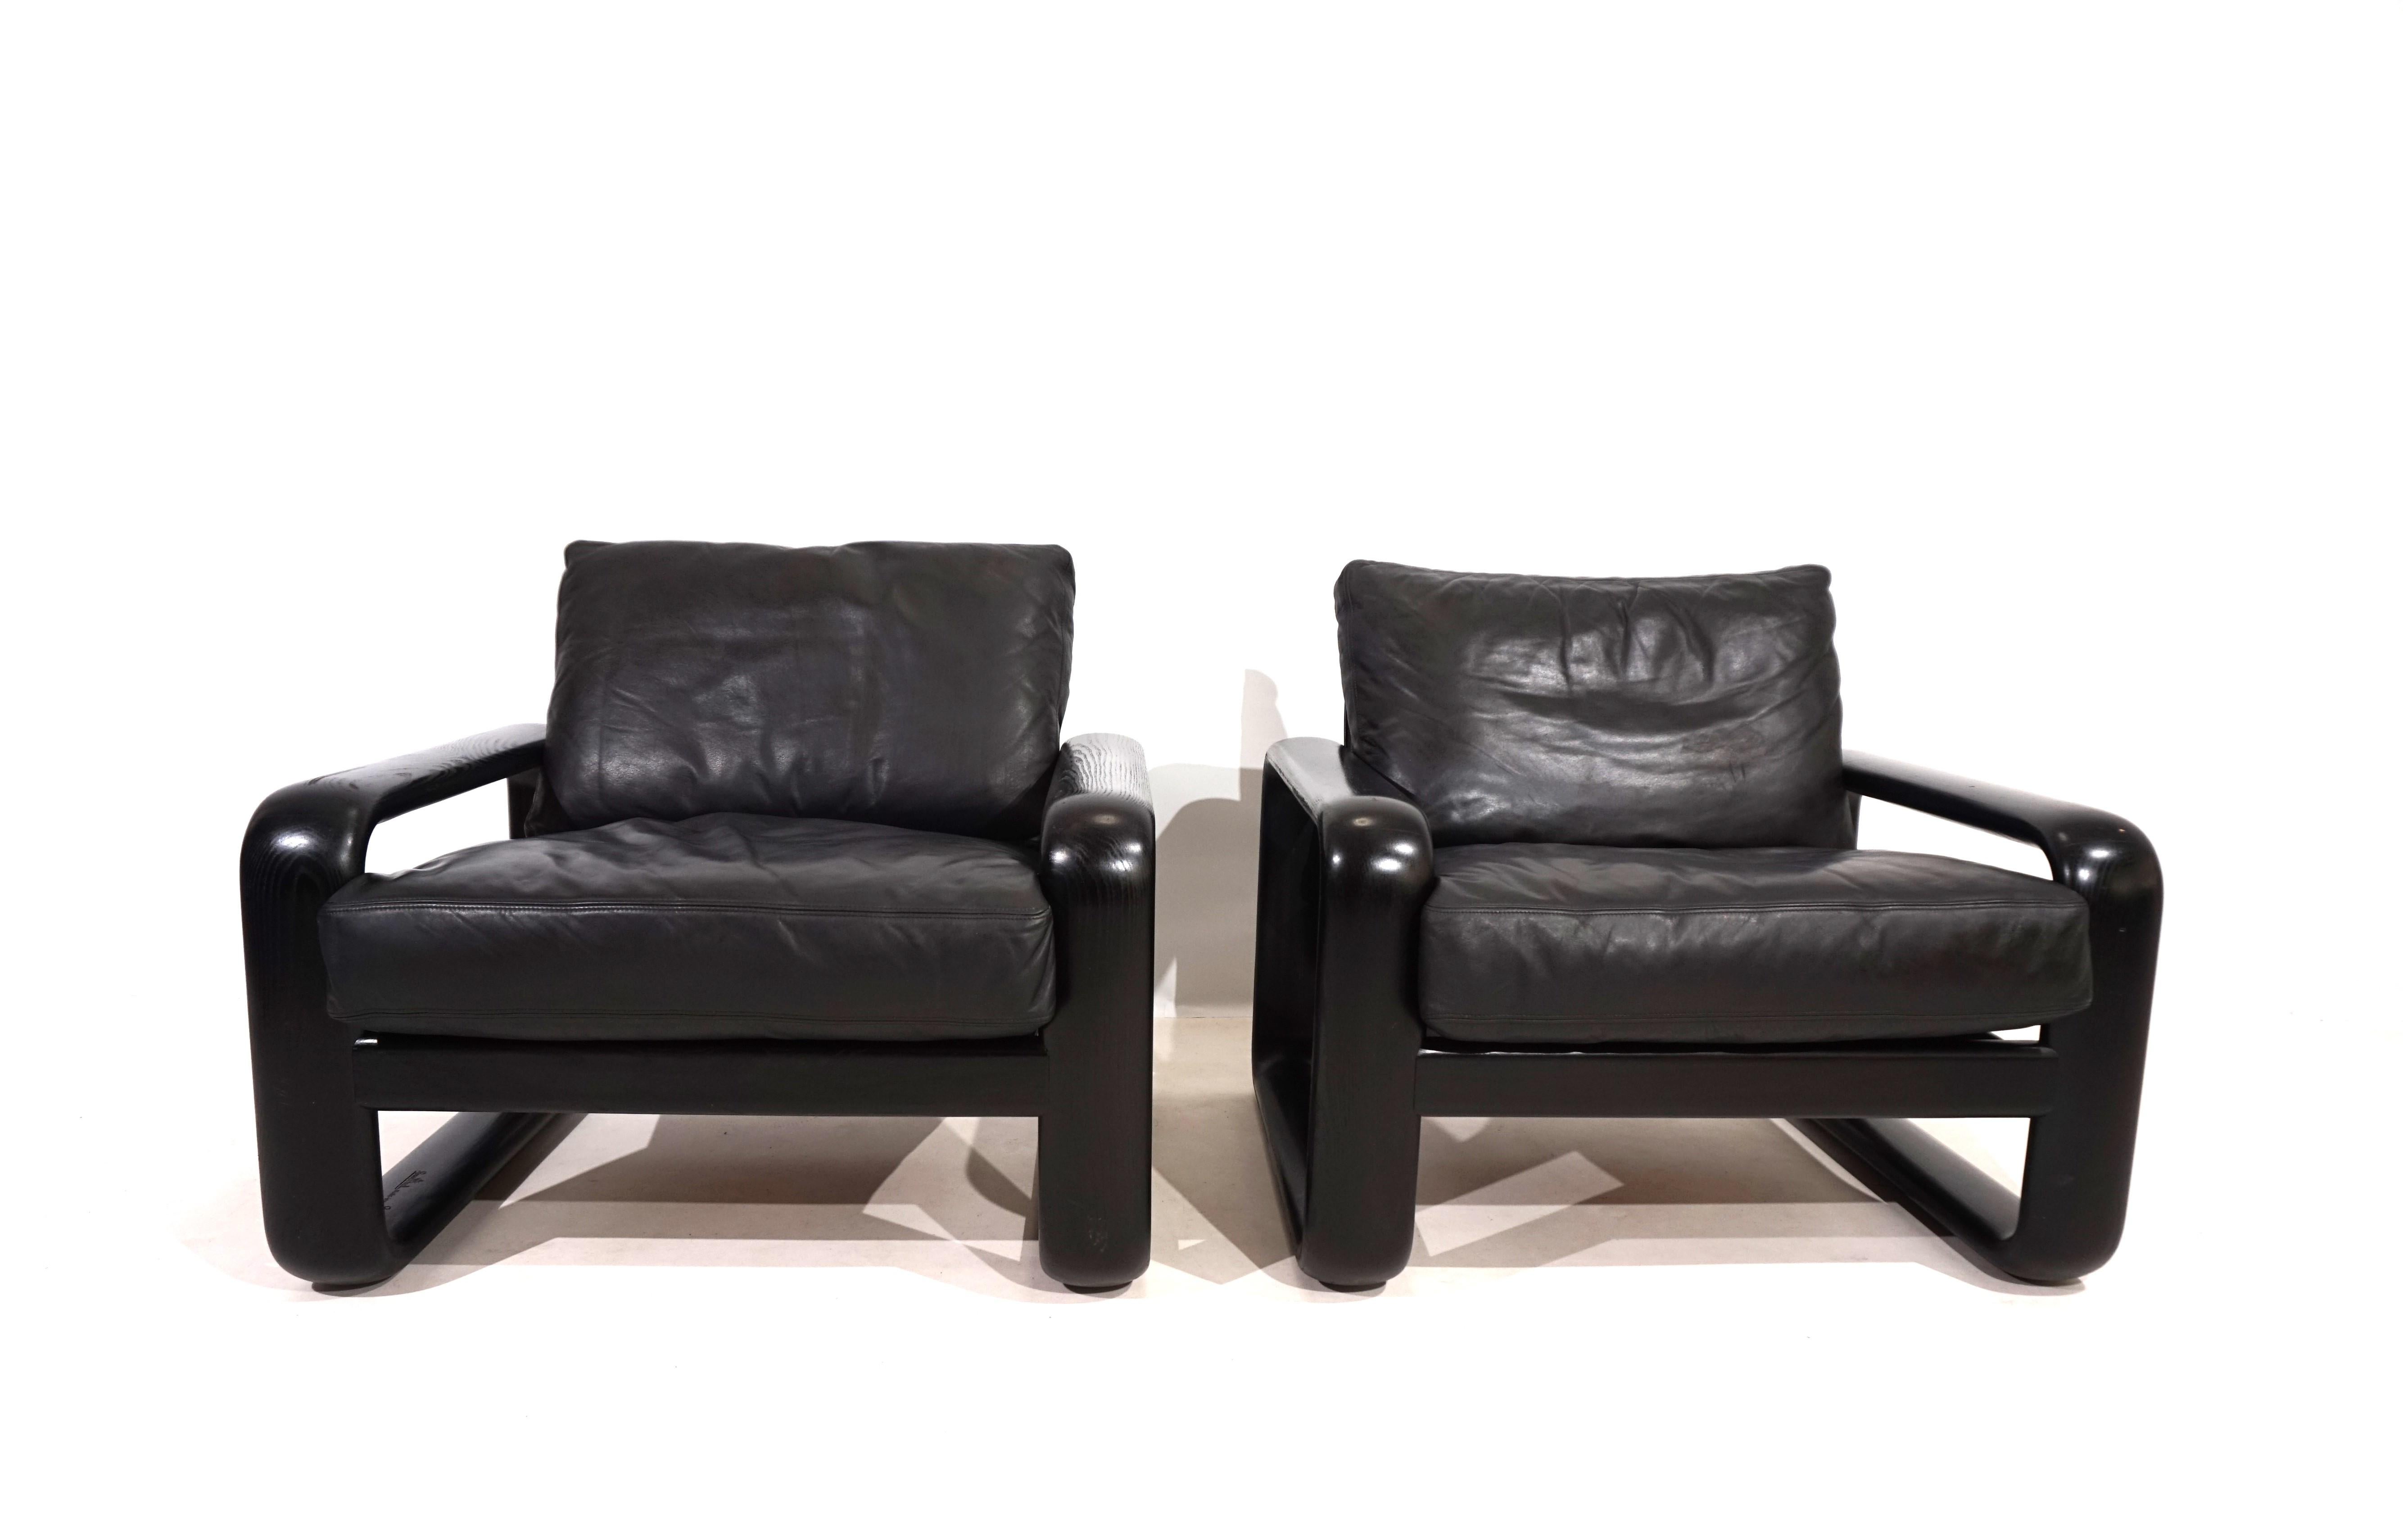 Set of 2 Rosenthal Hombre leather armchairs by Burkhard Vogtherr In Good Condition For Sale In Ludwigslust, DE